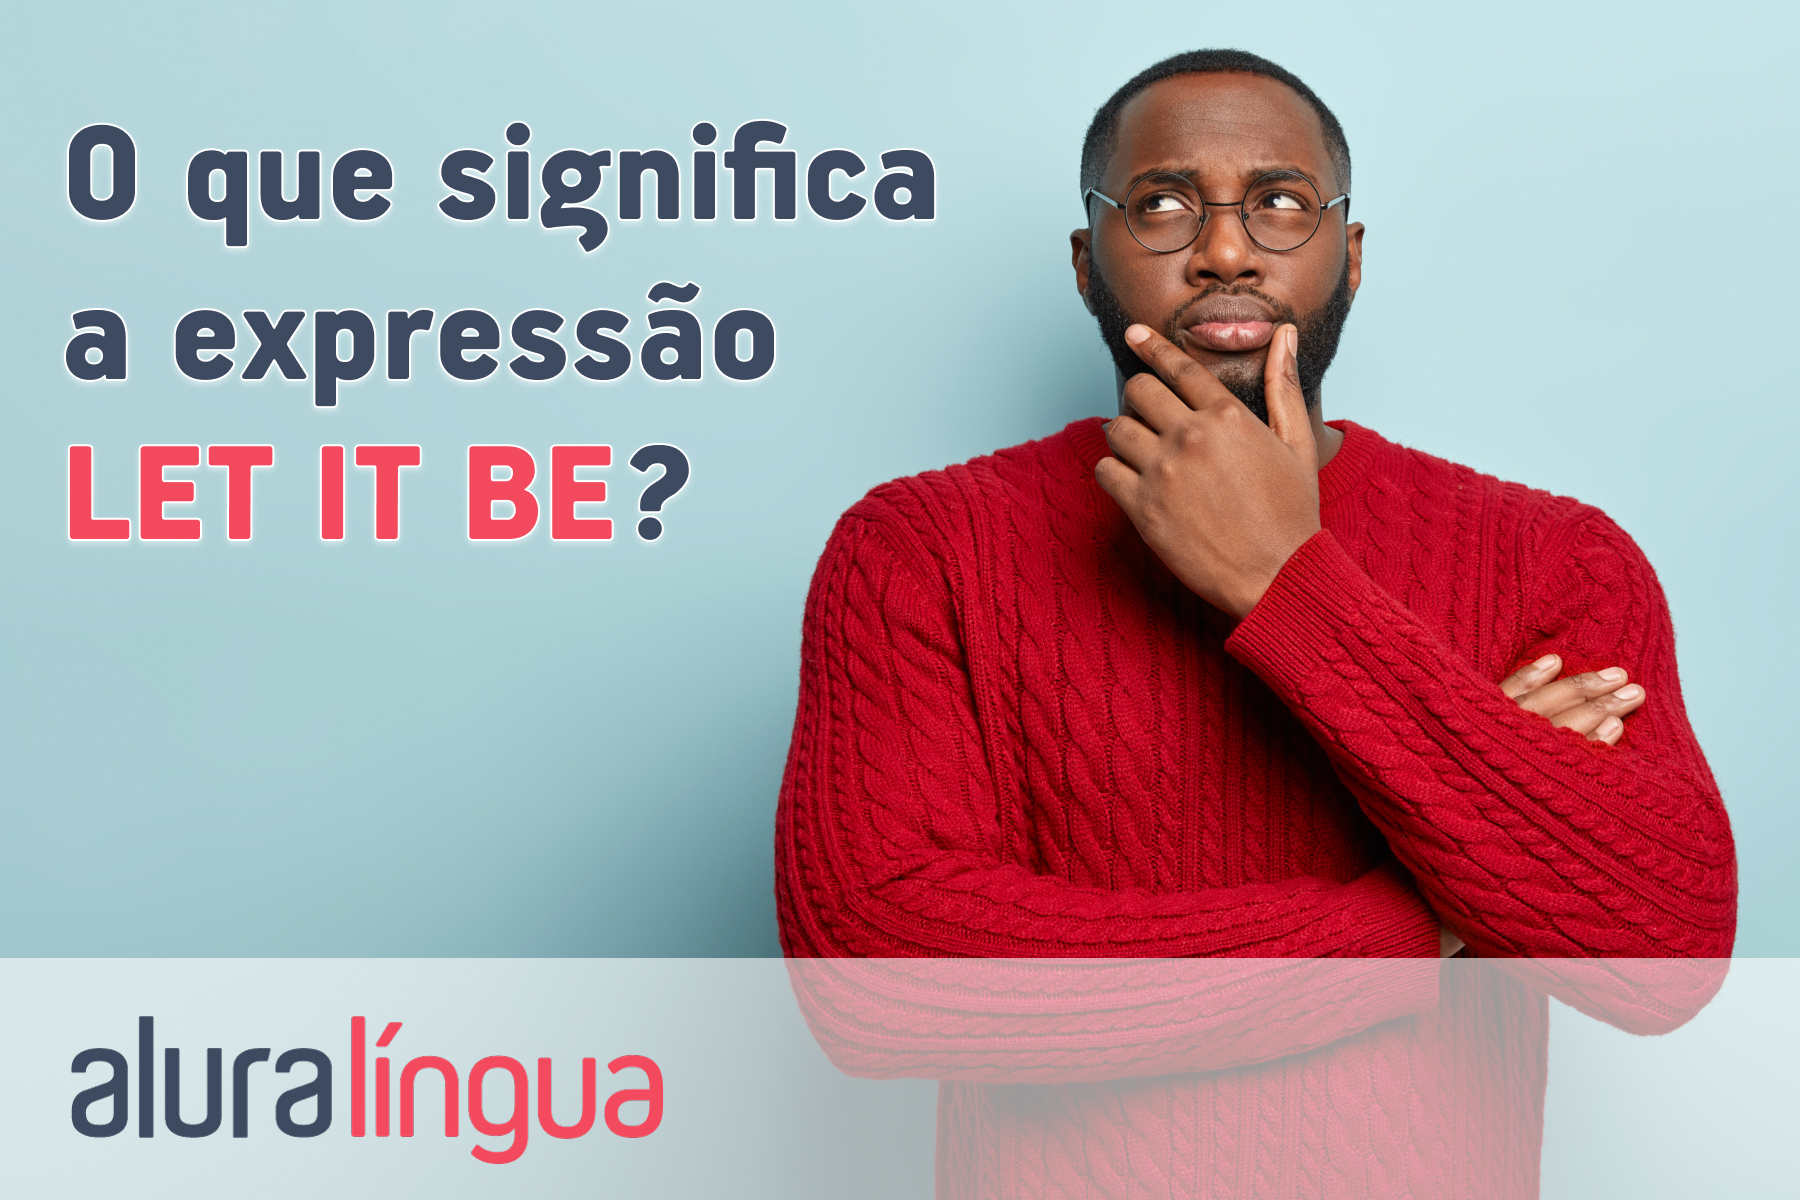 O que significa a expressão LET IT BE? #inset